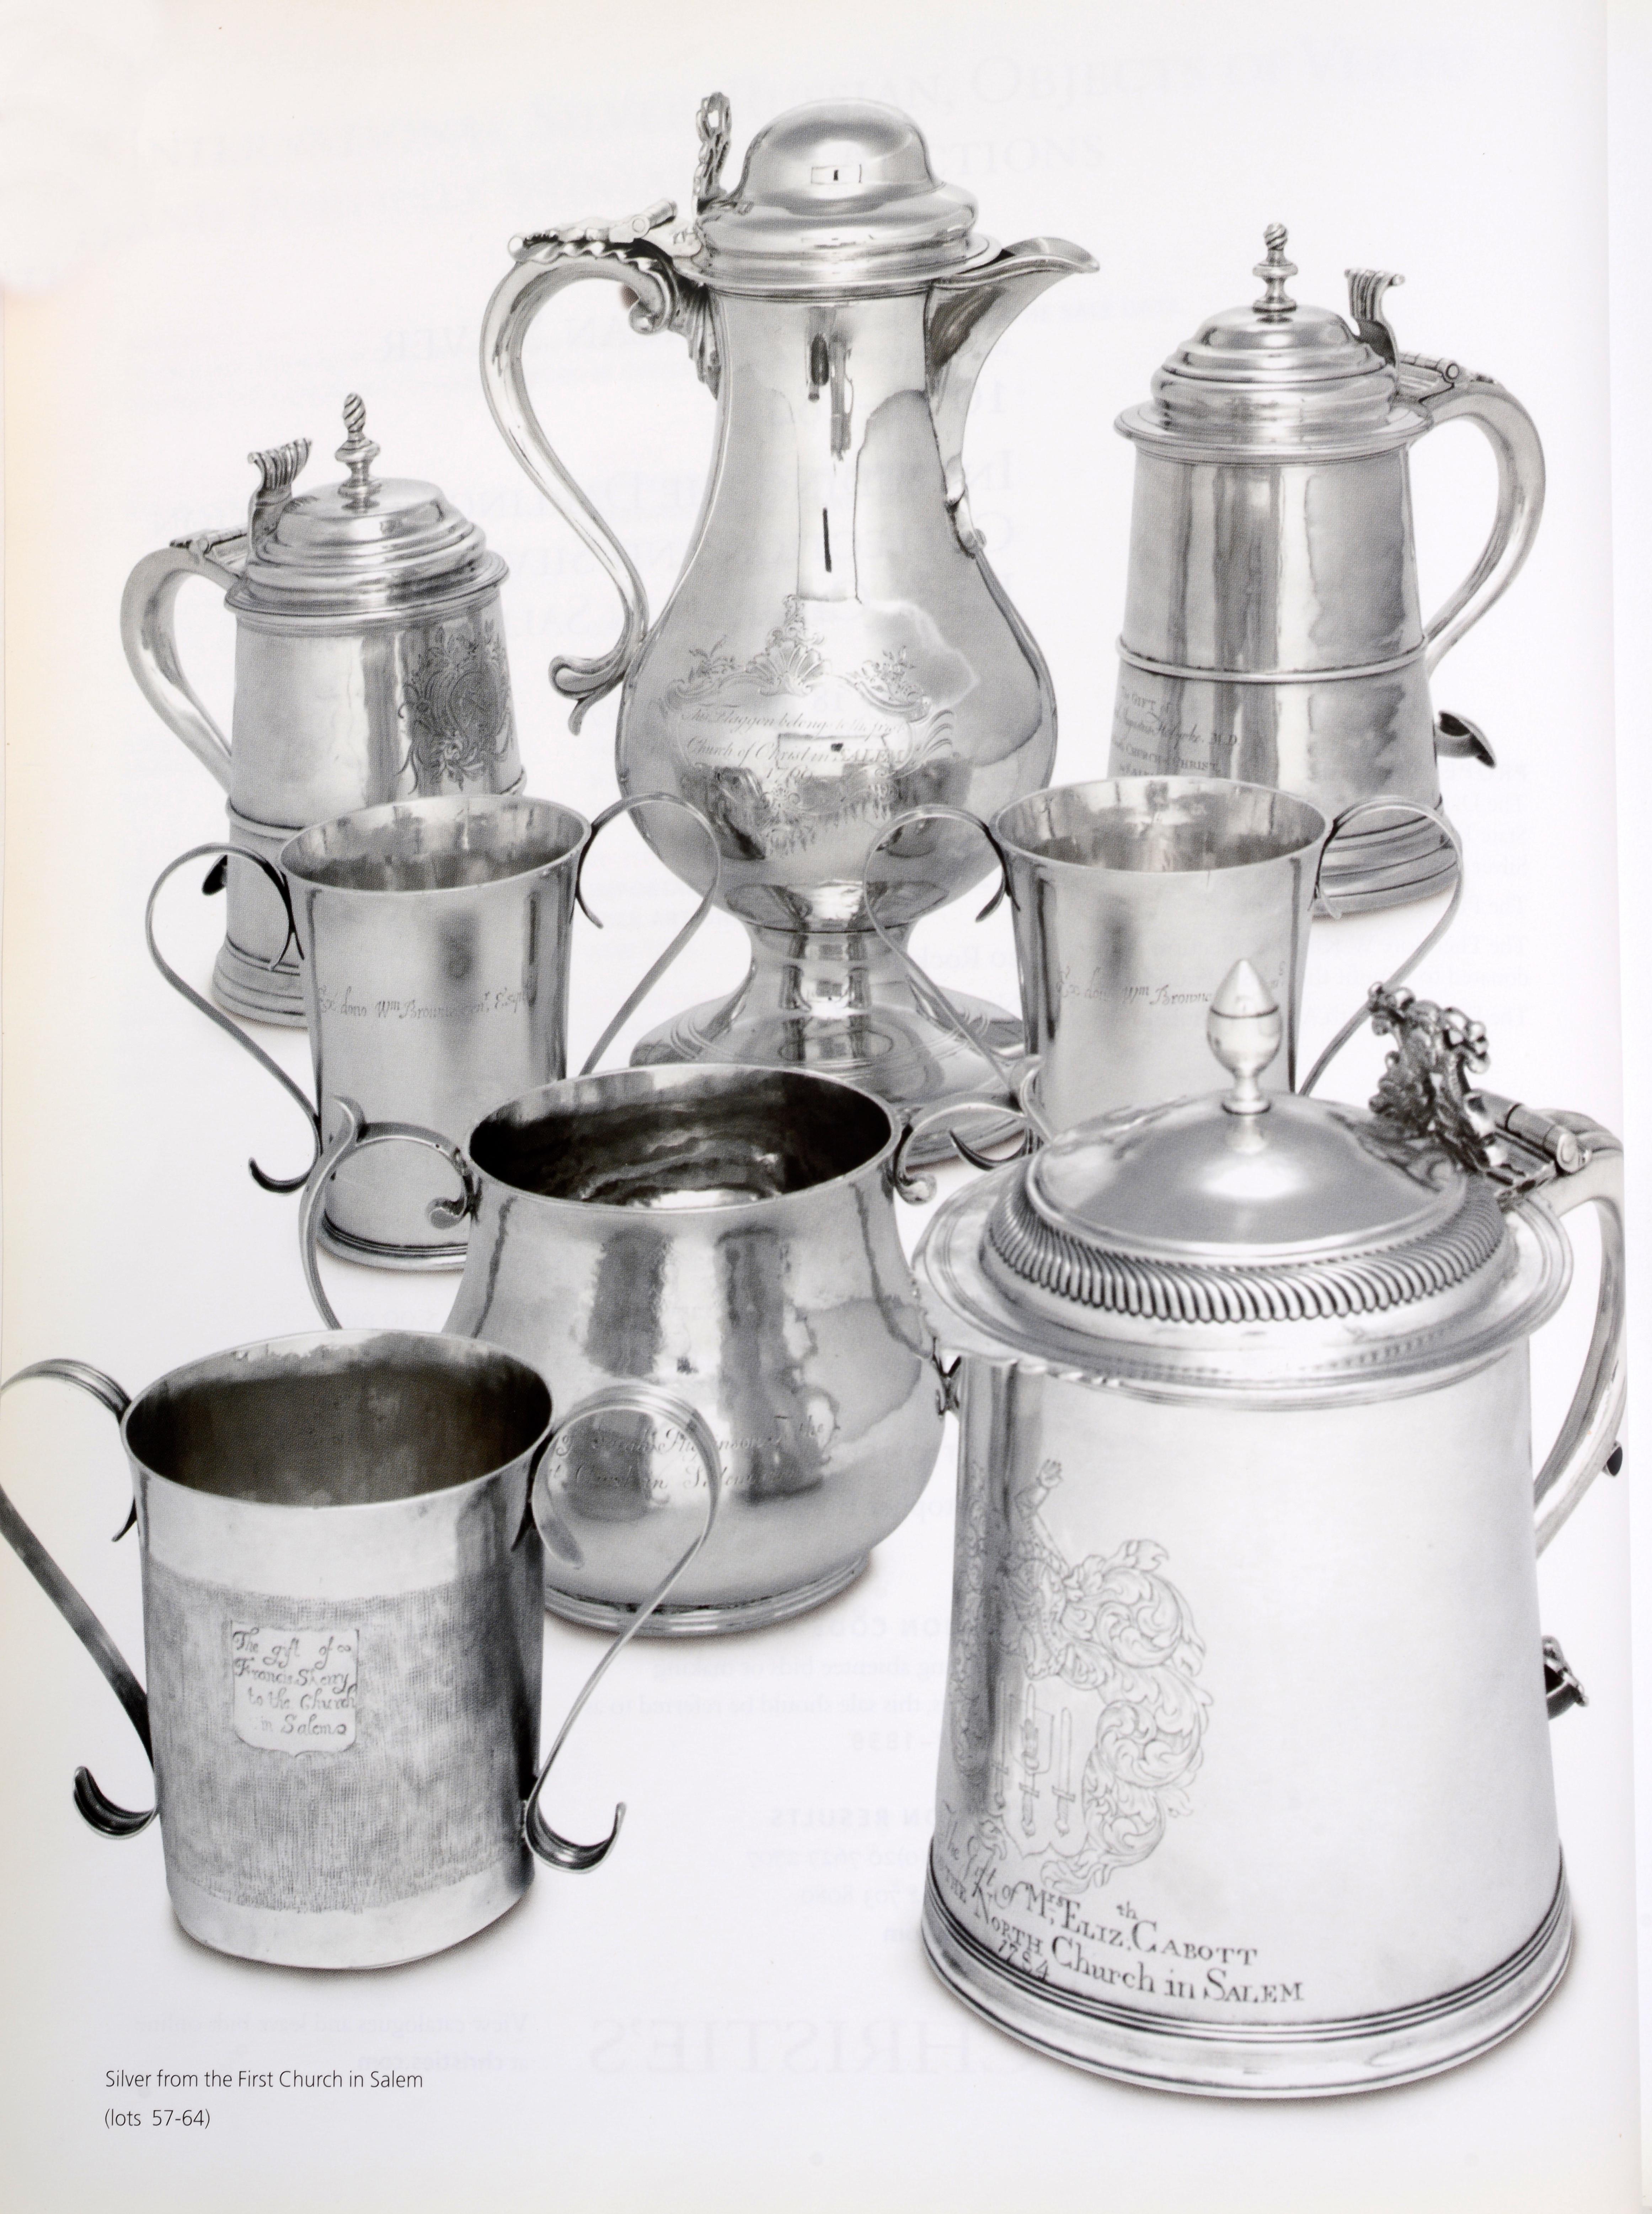 CHRISTIE'S CATALOG : EARLY AMERICAN SILVER 1670-1820 Including the Darling Foundation Collection and Silver from the First Church in Salem - NY - January 18 2007 along with a Catalog from American Art Association A Silver Monteith by John Coney,